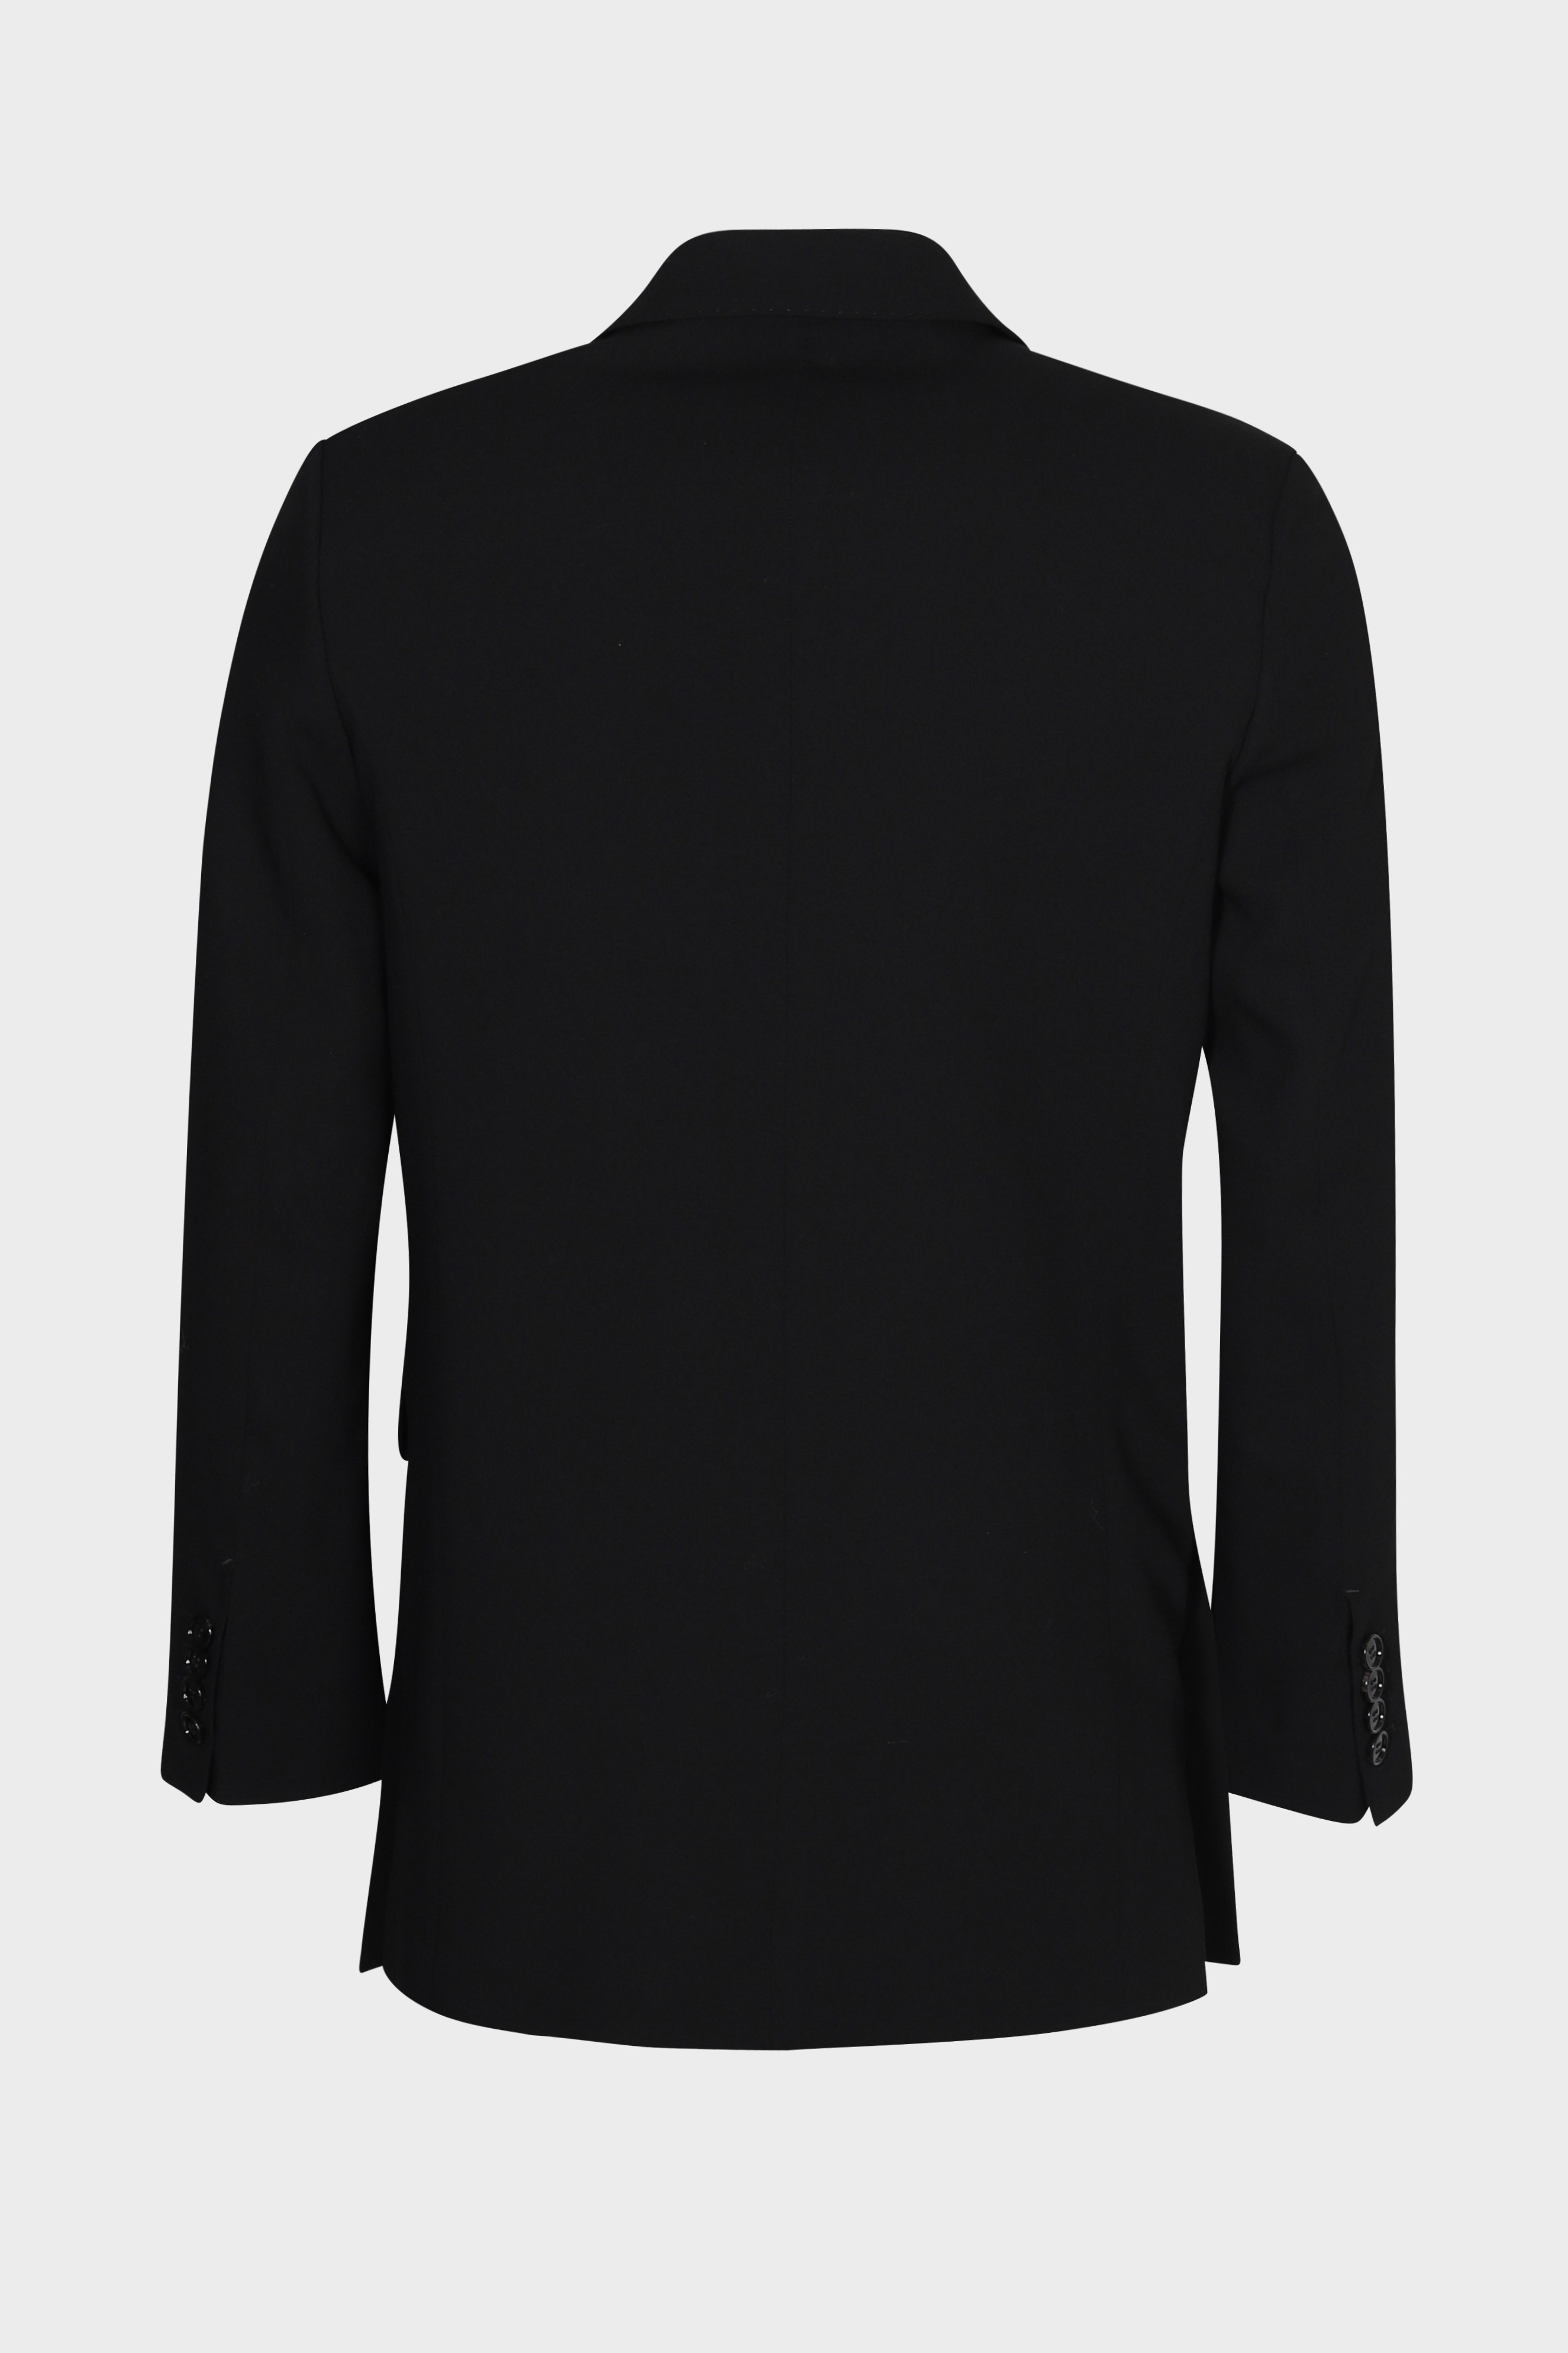 AMI PARIS Double Breasted Oversize Jacket in Black 48